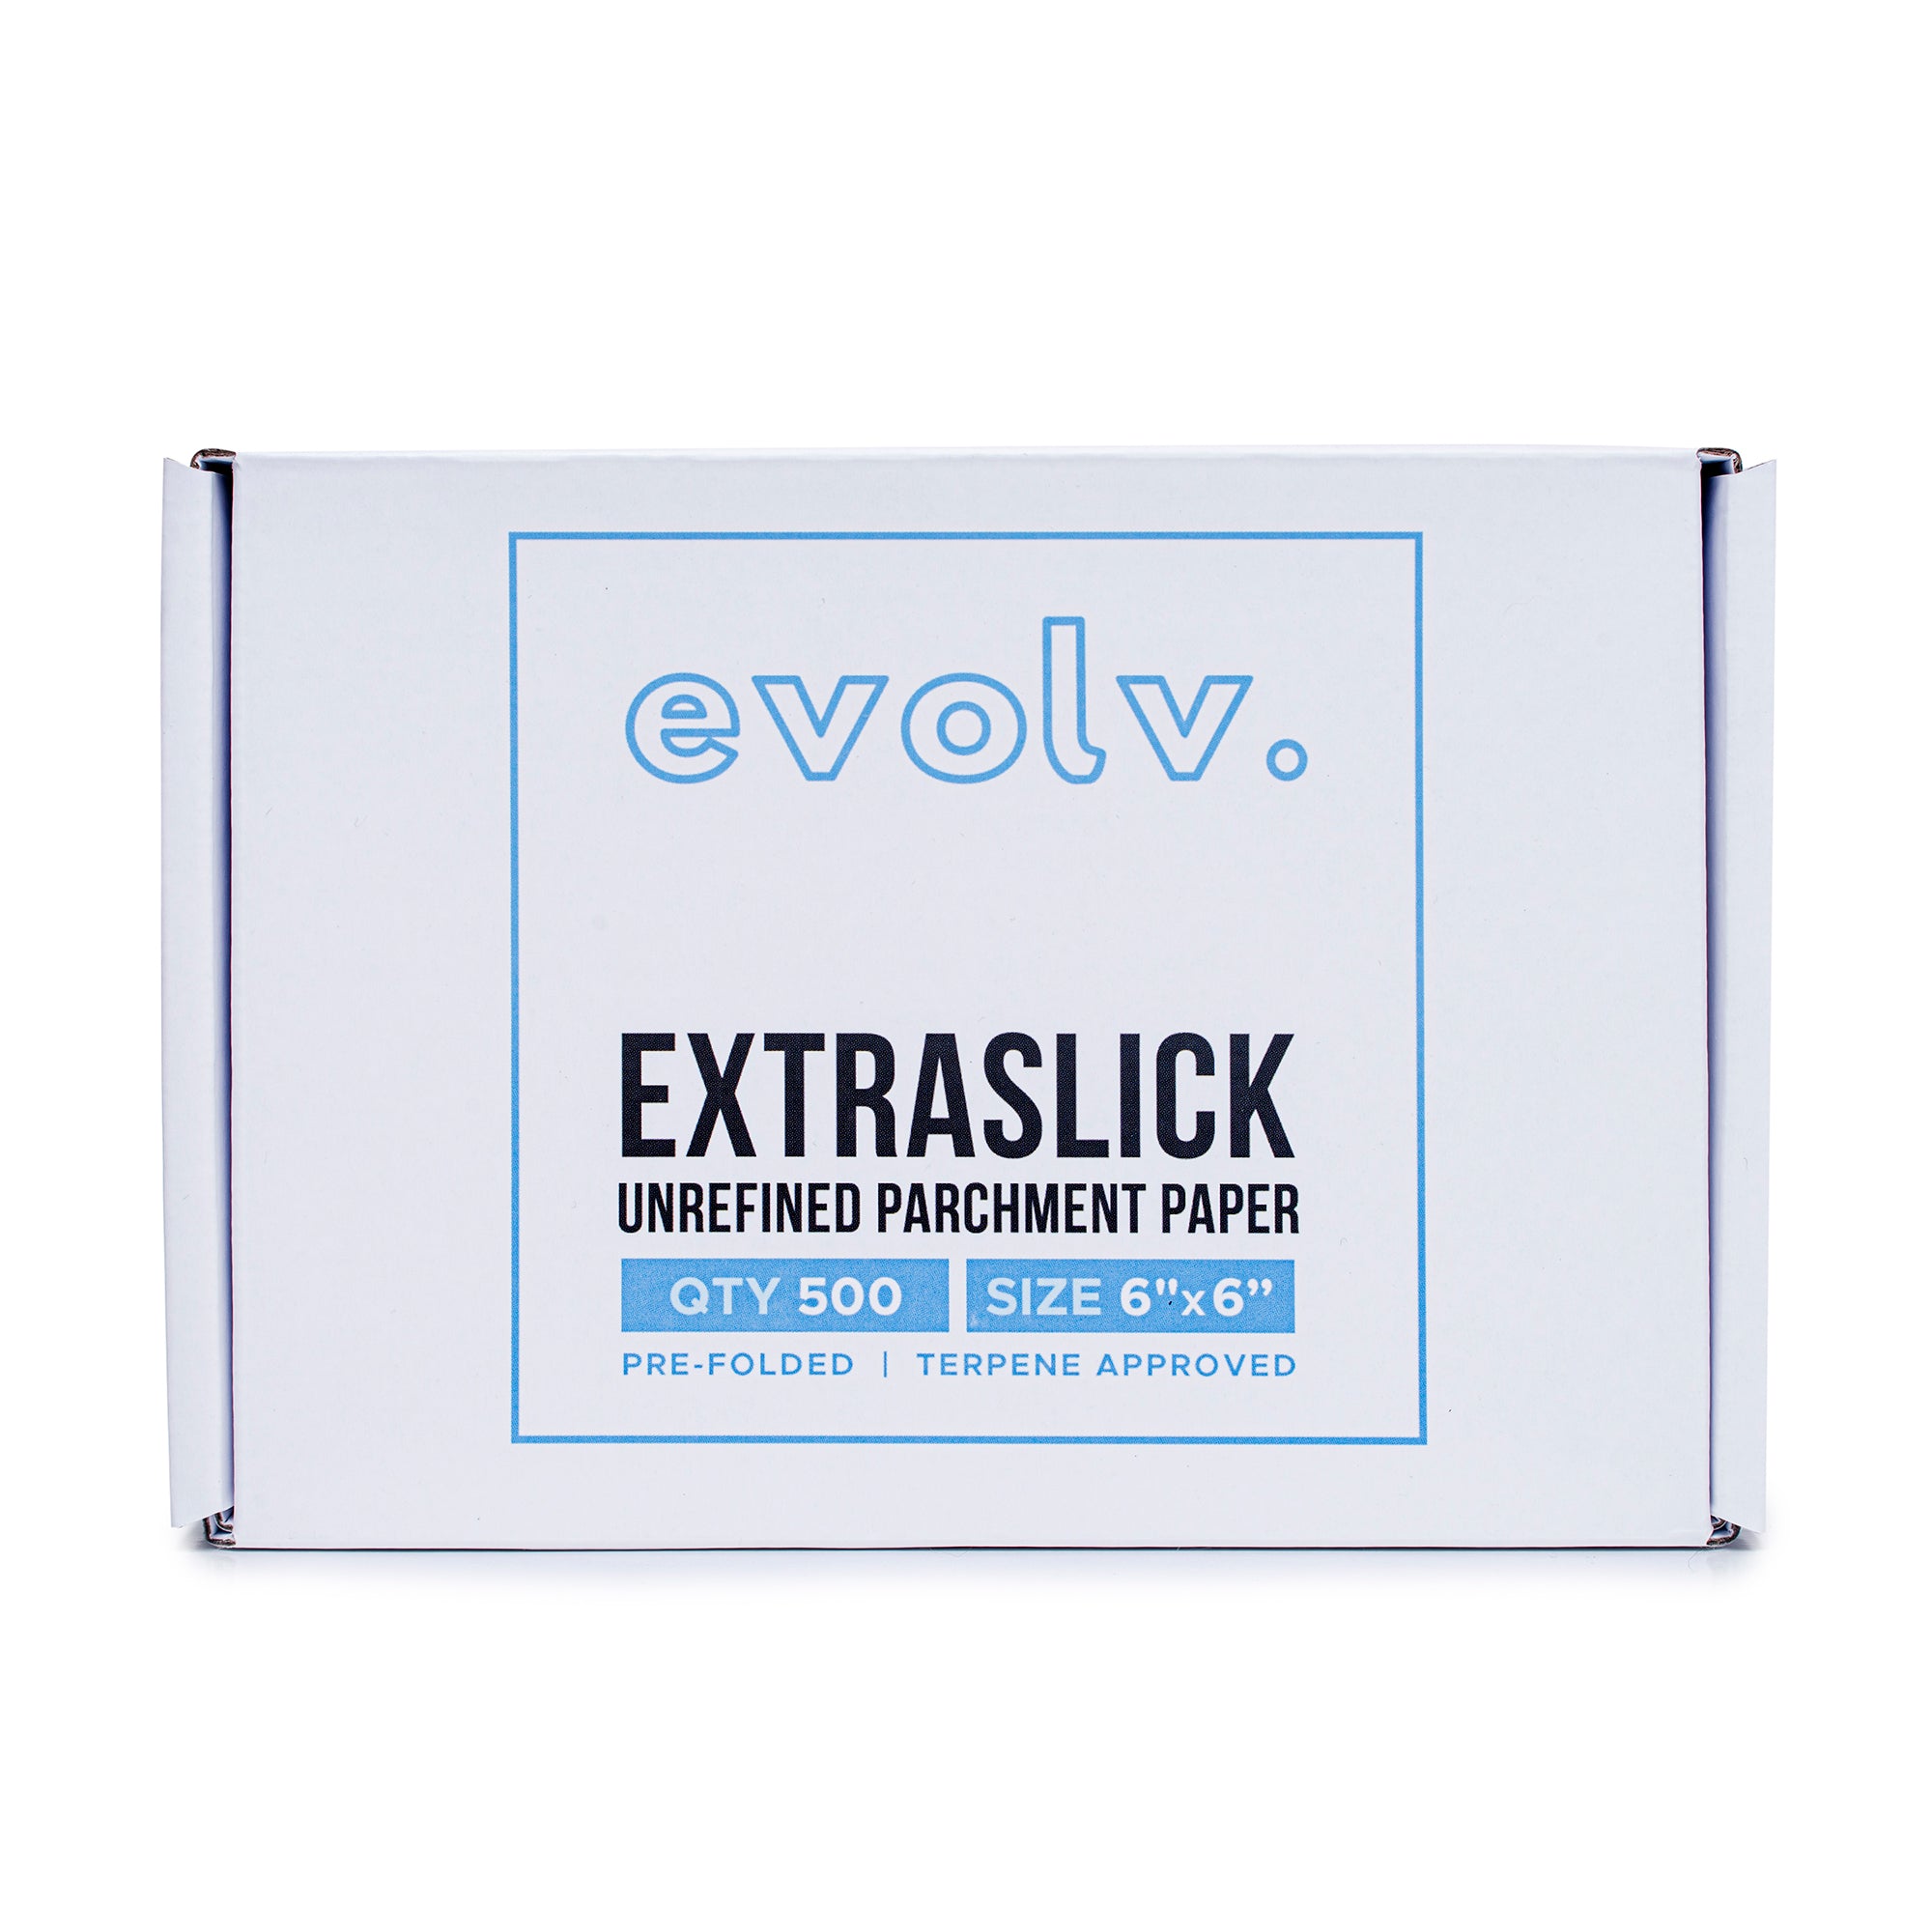 EVOLV | Parchment Squares | Pre-Folded & Extra-Slick Sheets | 6"x6" | 500 Count